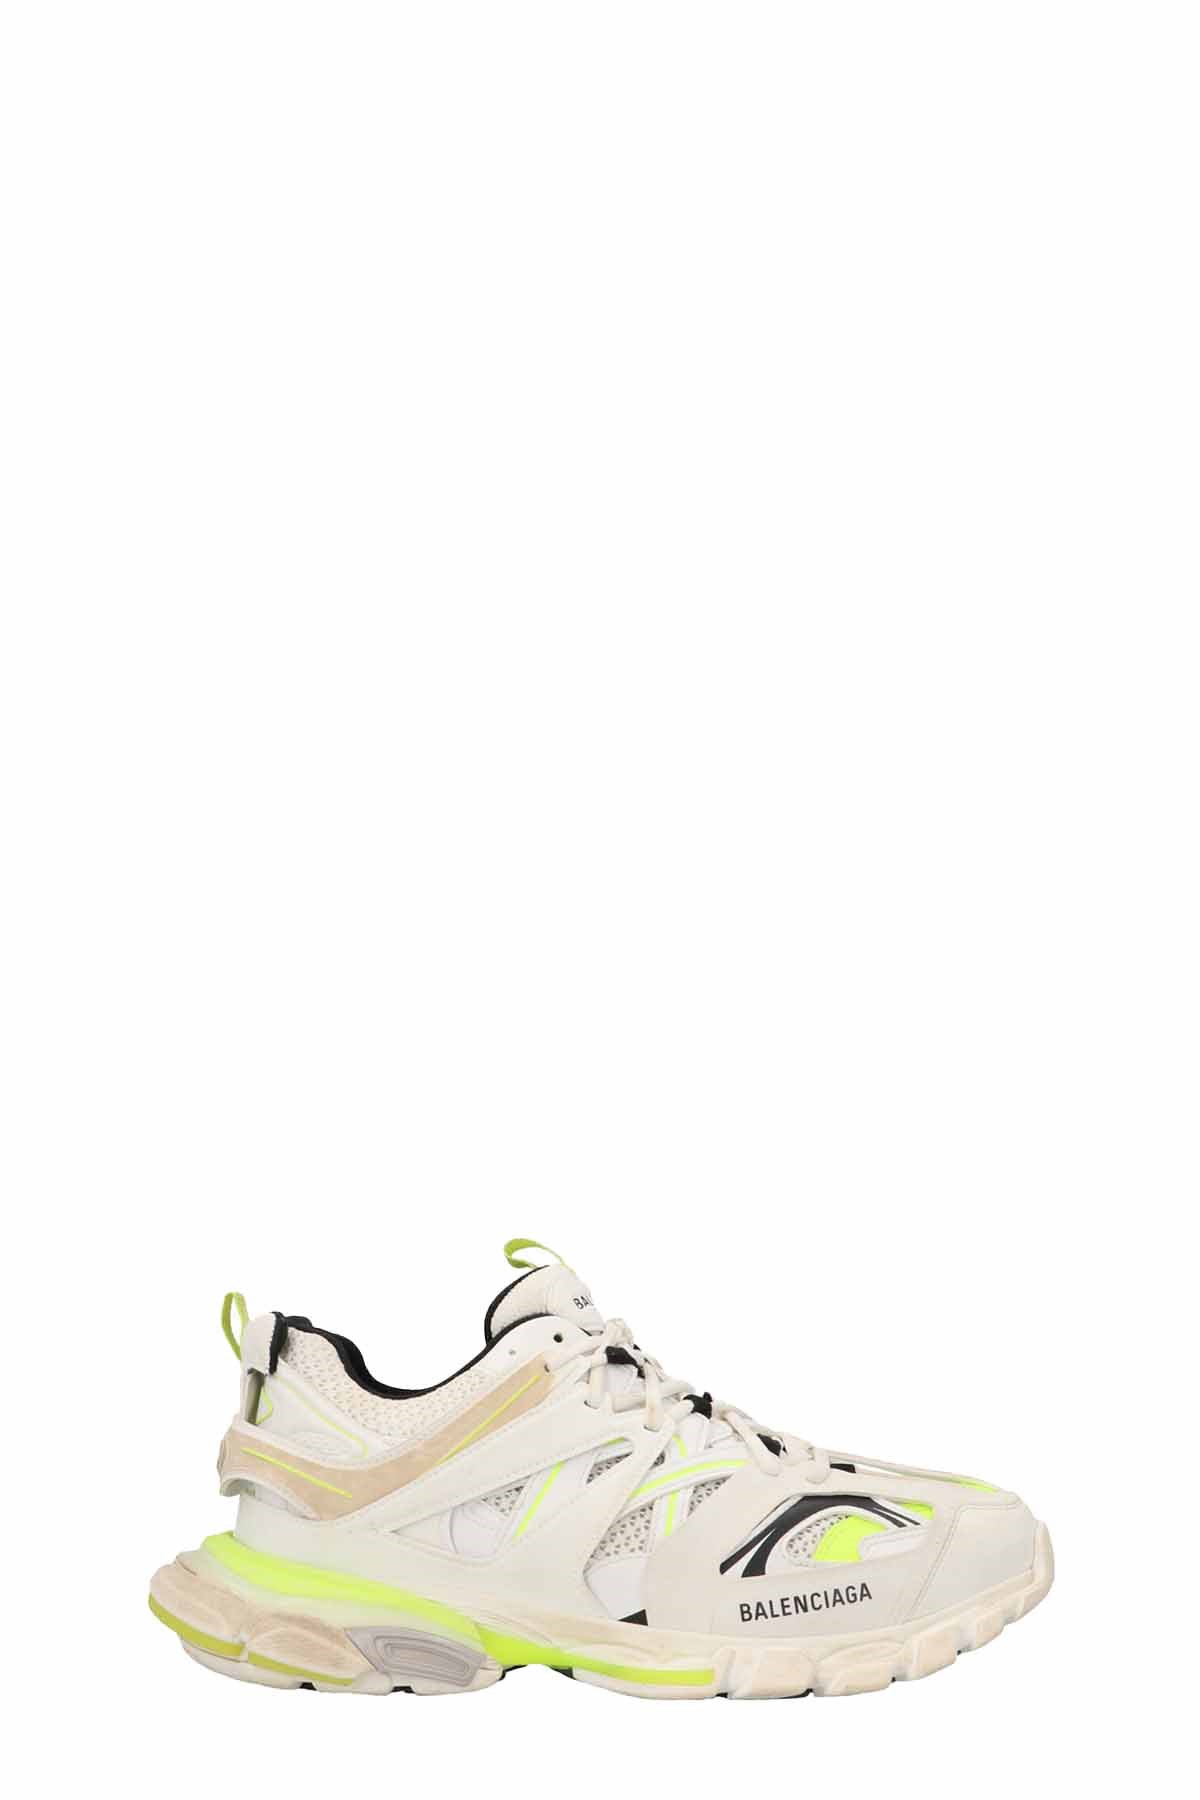 BALENCIAGA 'Track Worn Out’ Sneakers